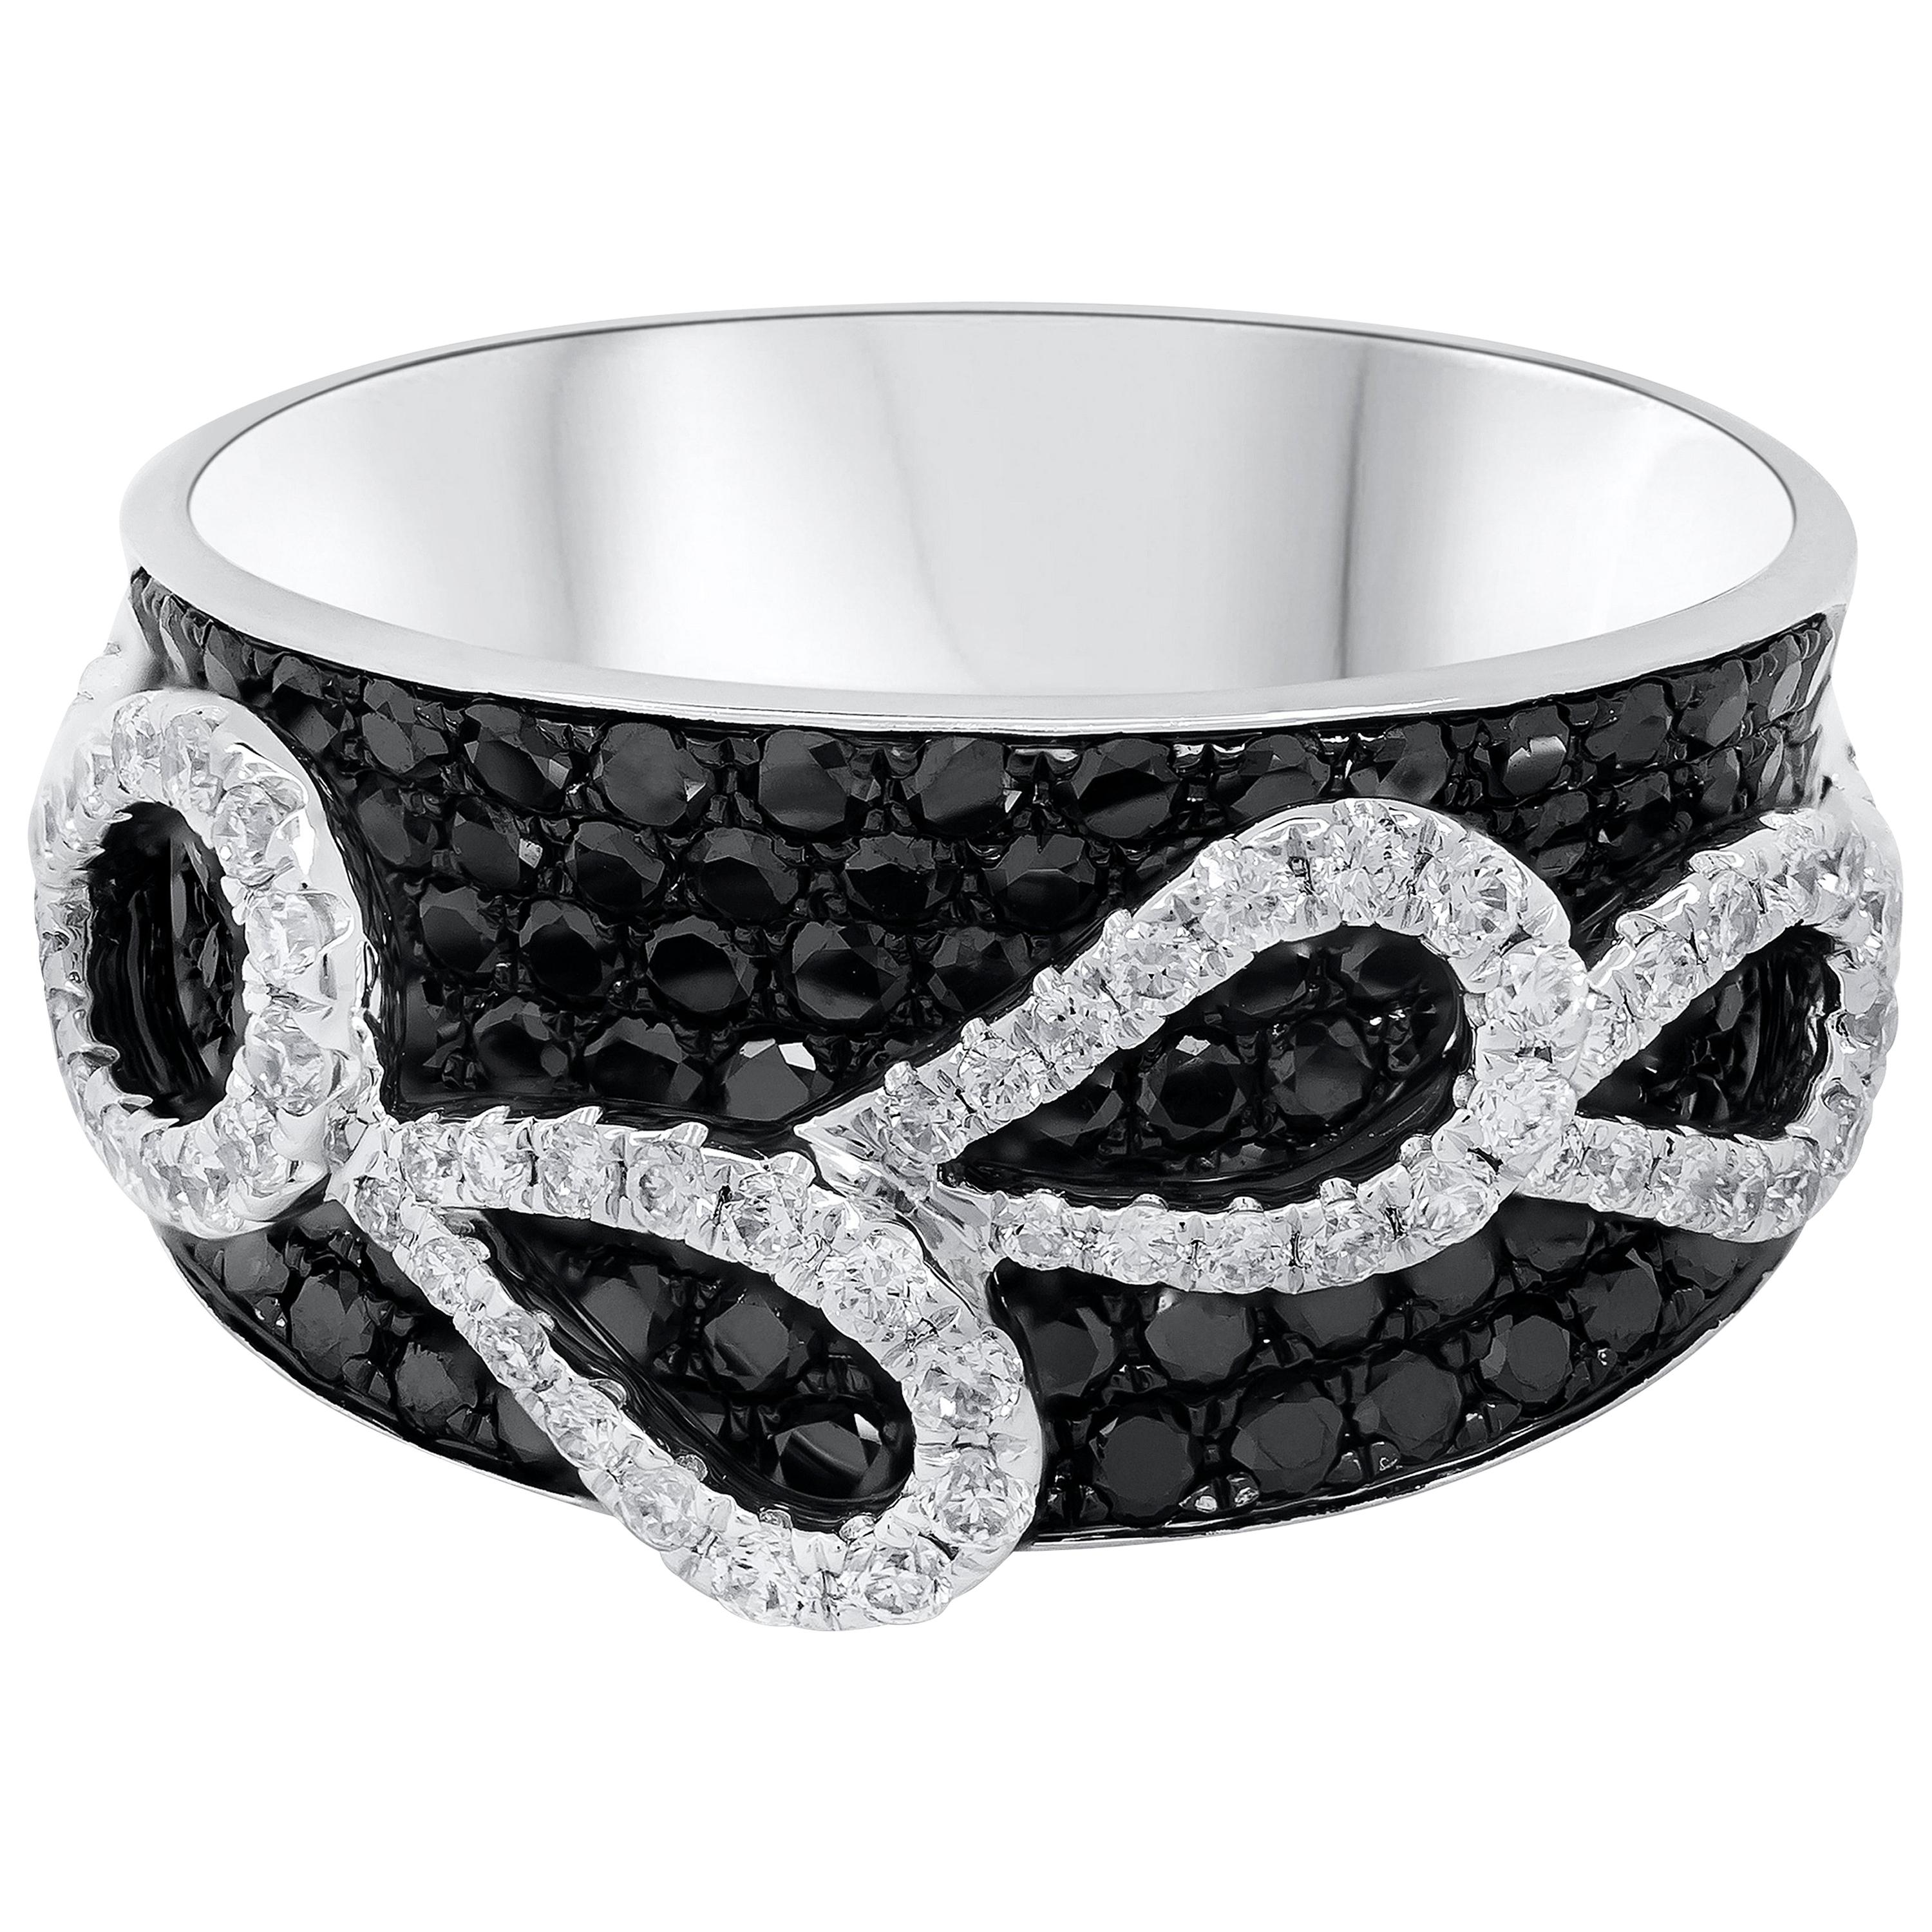 A fashionable concave fashion ring featuring 1.56 carats total of round black diamonds, set in a micro-pave dome design and 0.51 carats total of white diamonds set like a floating ribbon design. Finely made in 18K White Gold and Size 6.75 US